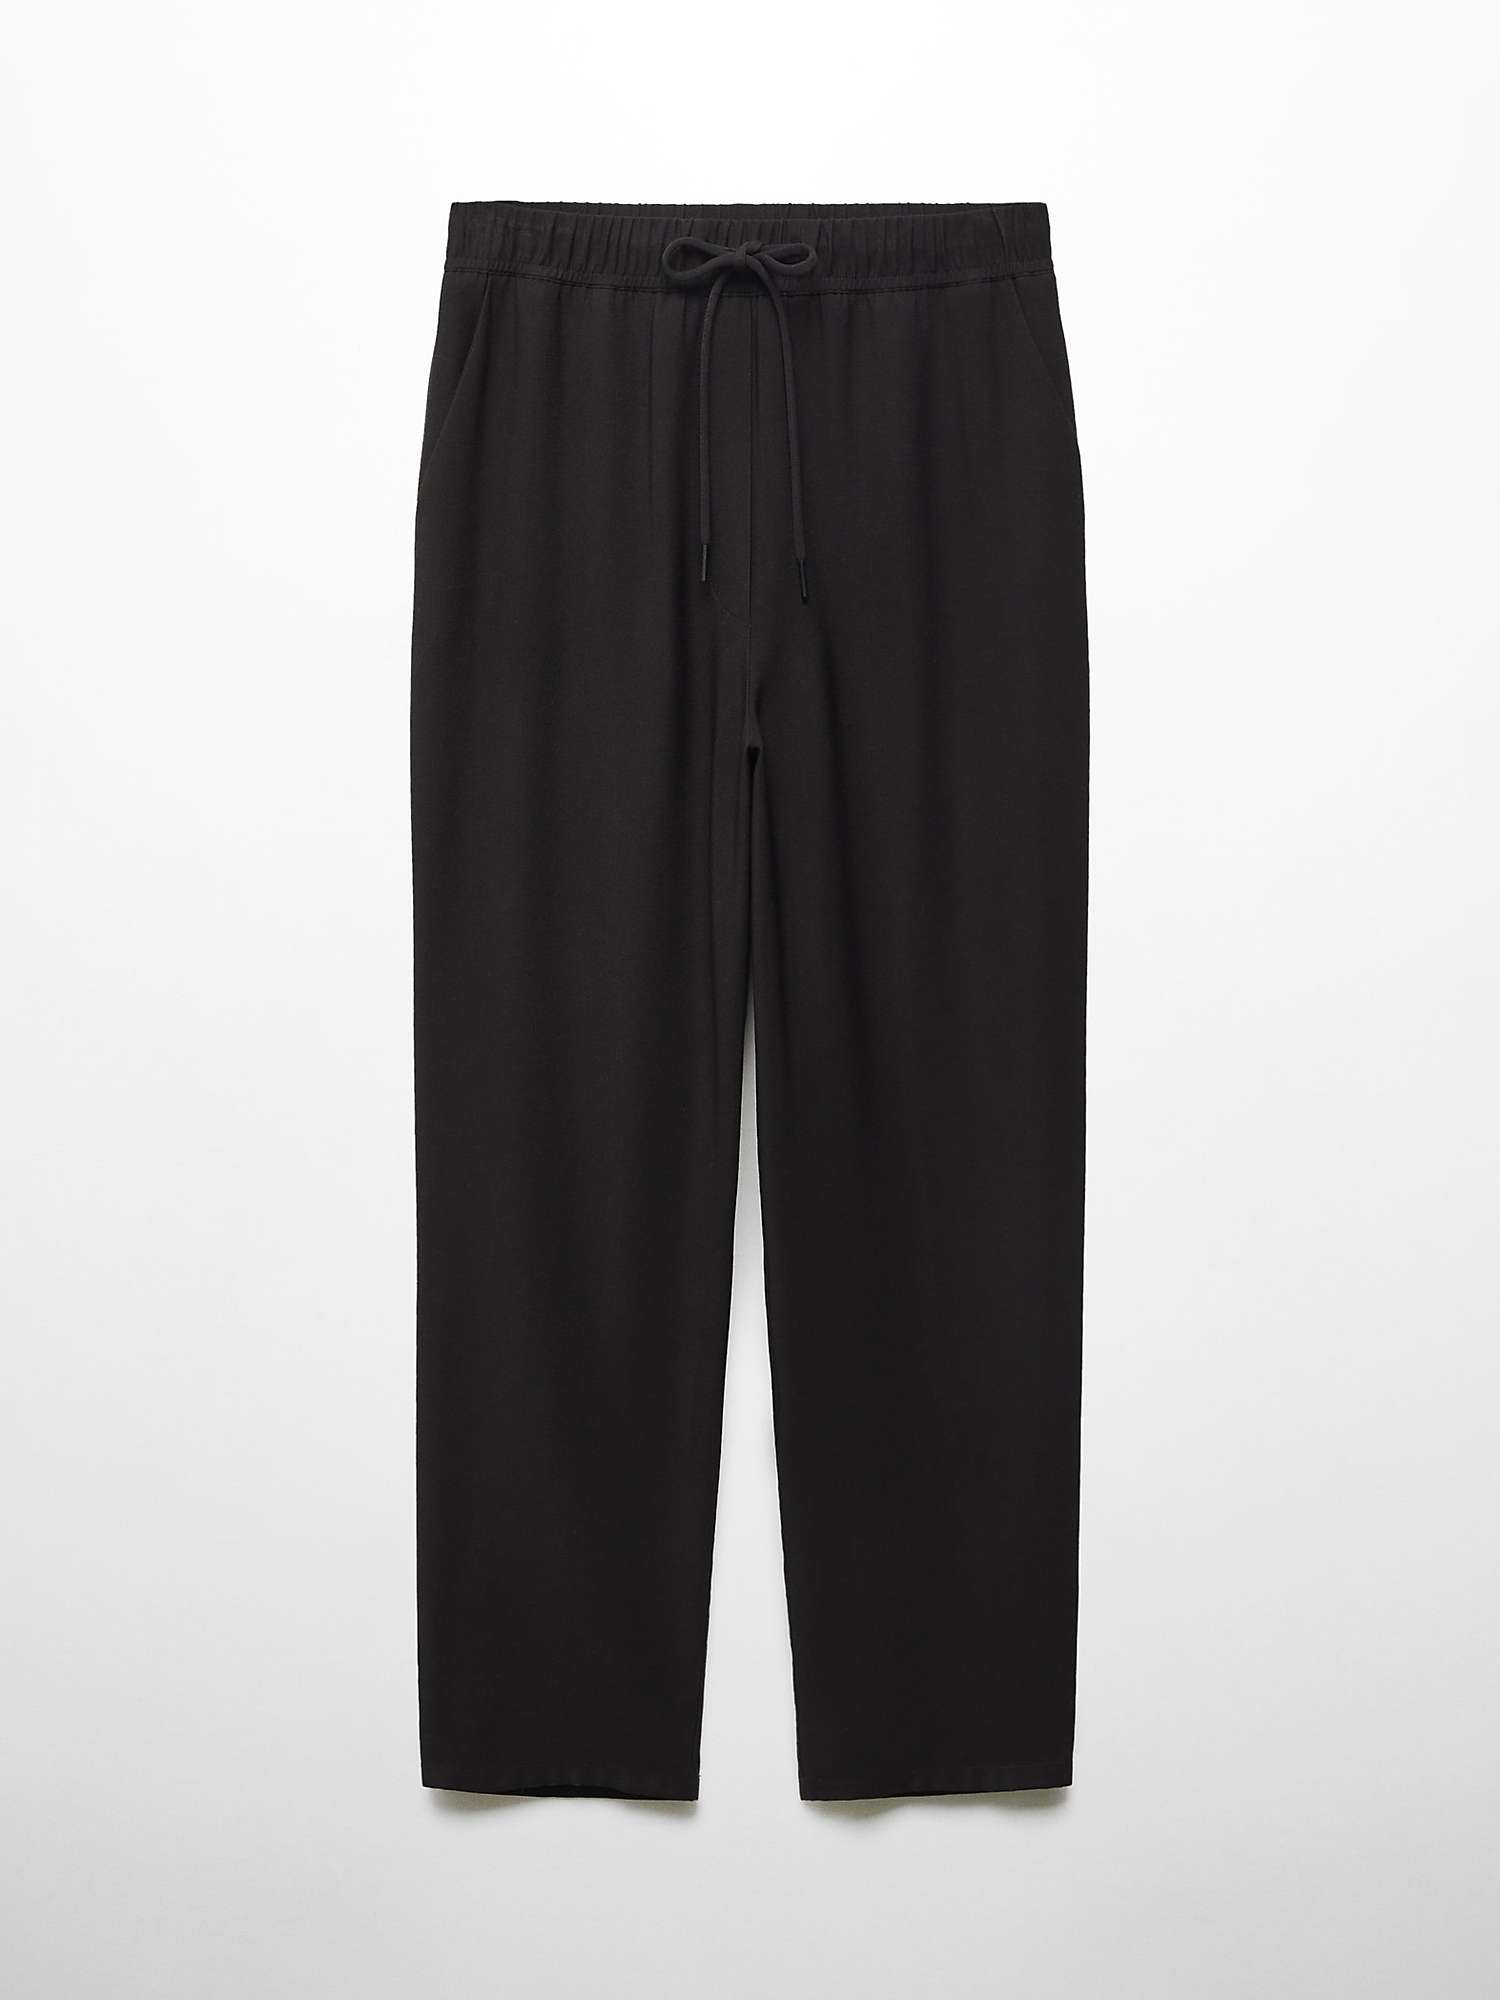 Buy Mango Fludio Cropped Trousers Online at johnlewis.com